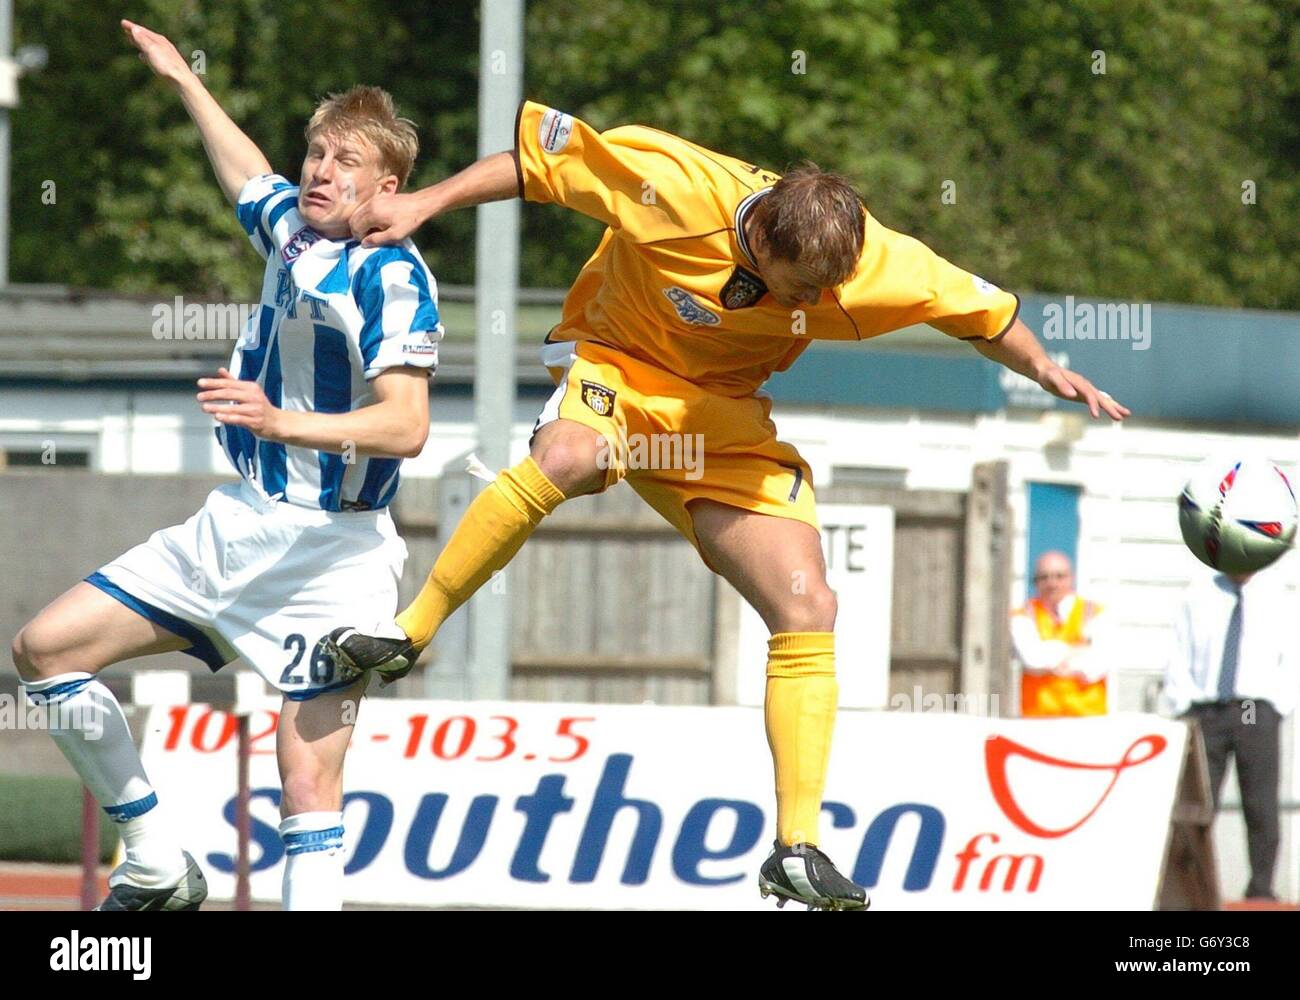 Dan Harding Brighton (left) challanges for the ball against David Pipe Notts Couny for Brighton in the Nationwide Division 2, Brighton V Notts County game from The Withdean Stadium, Brighton. Stock Photo